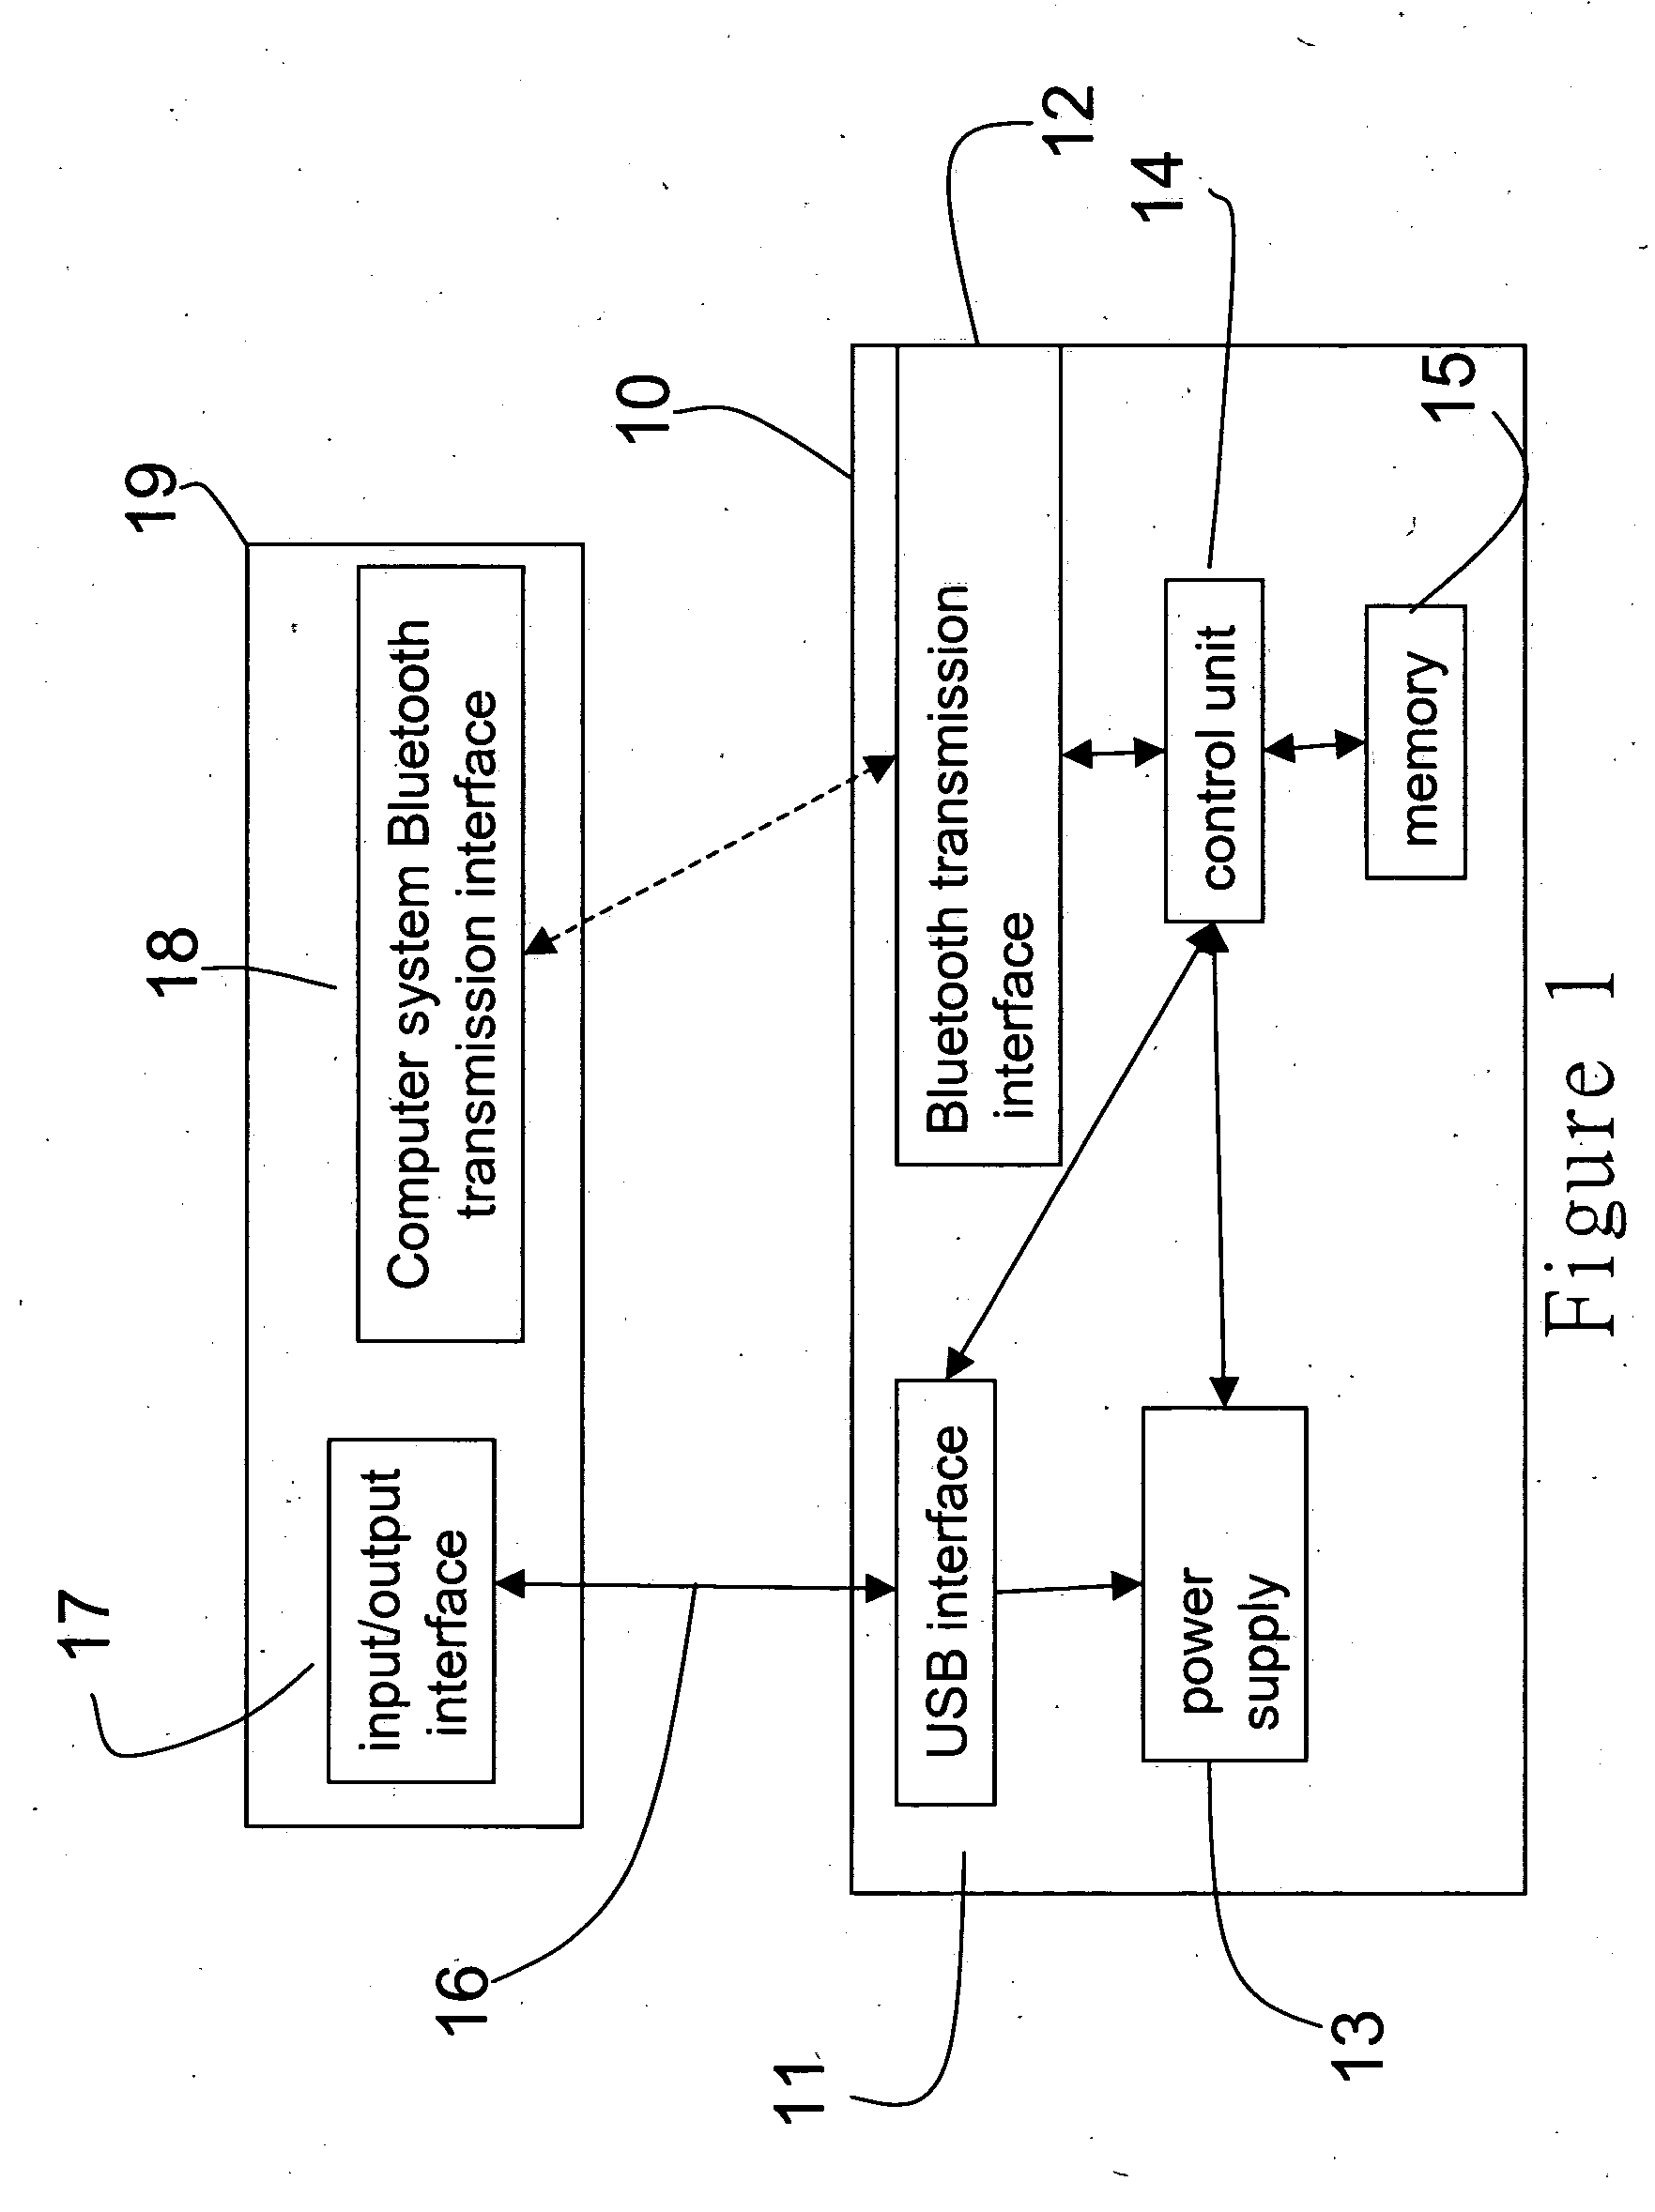 Detecting and actuating method of bluetooth devices and a control system thereof